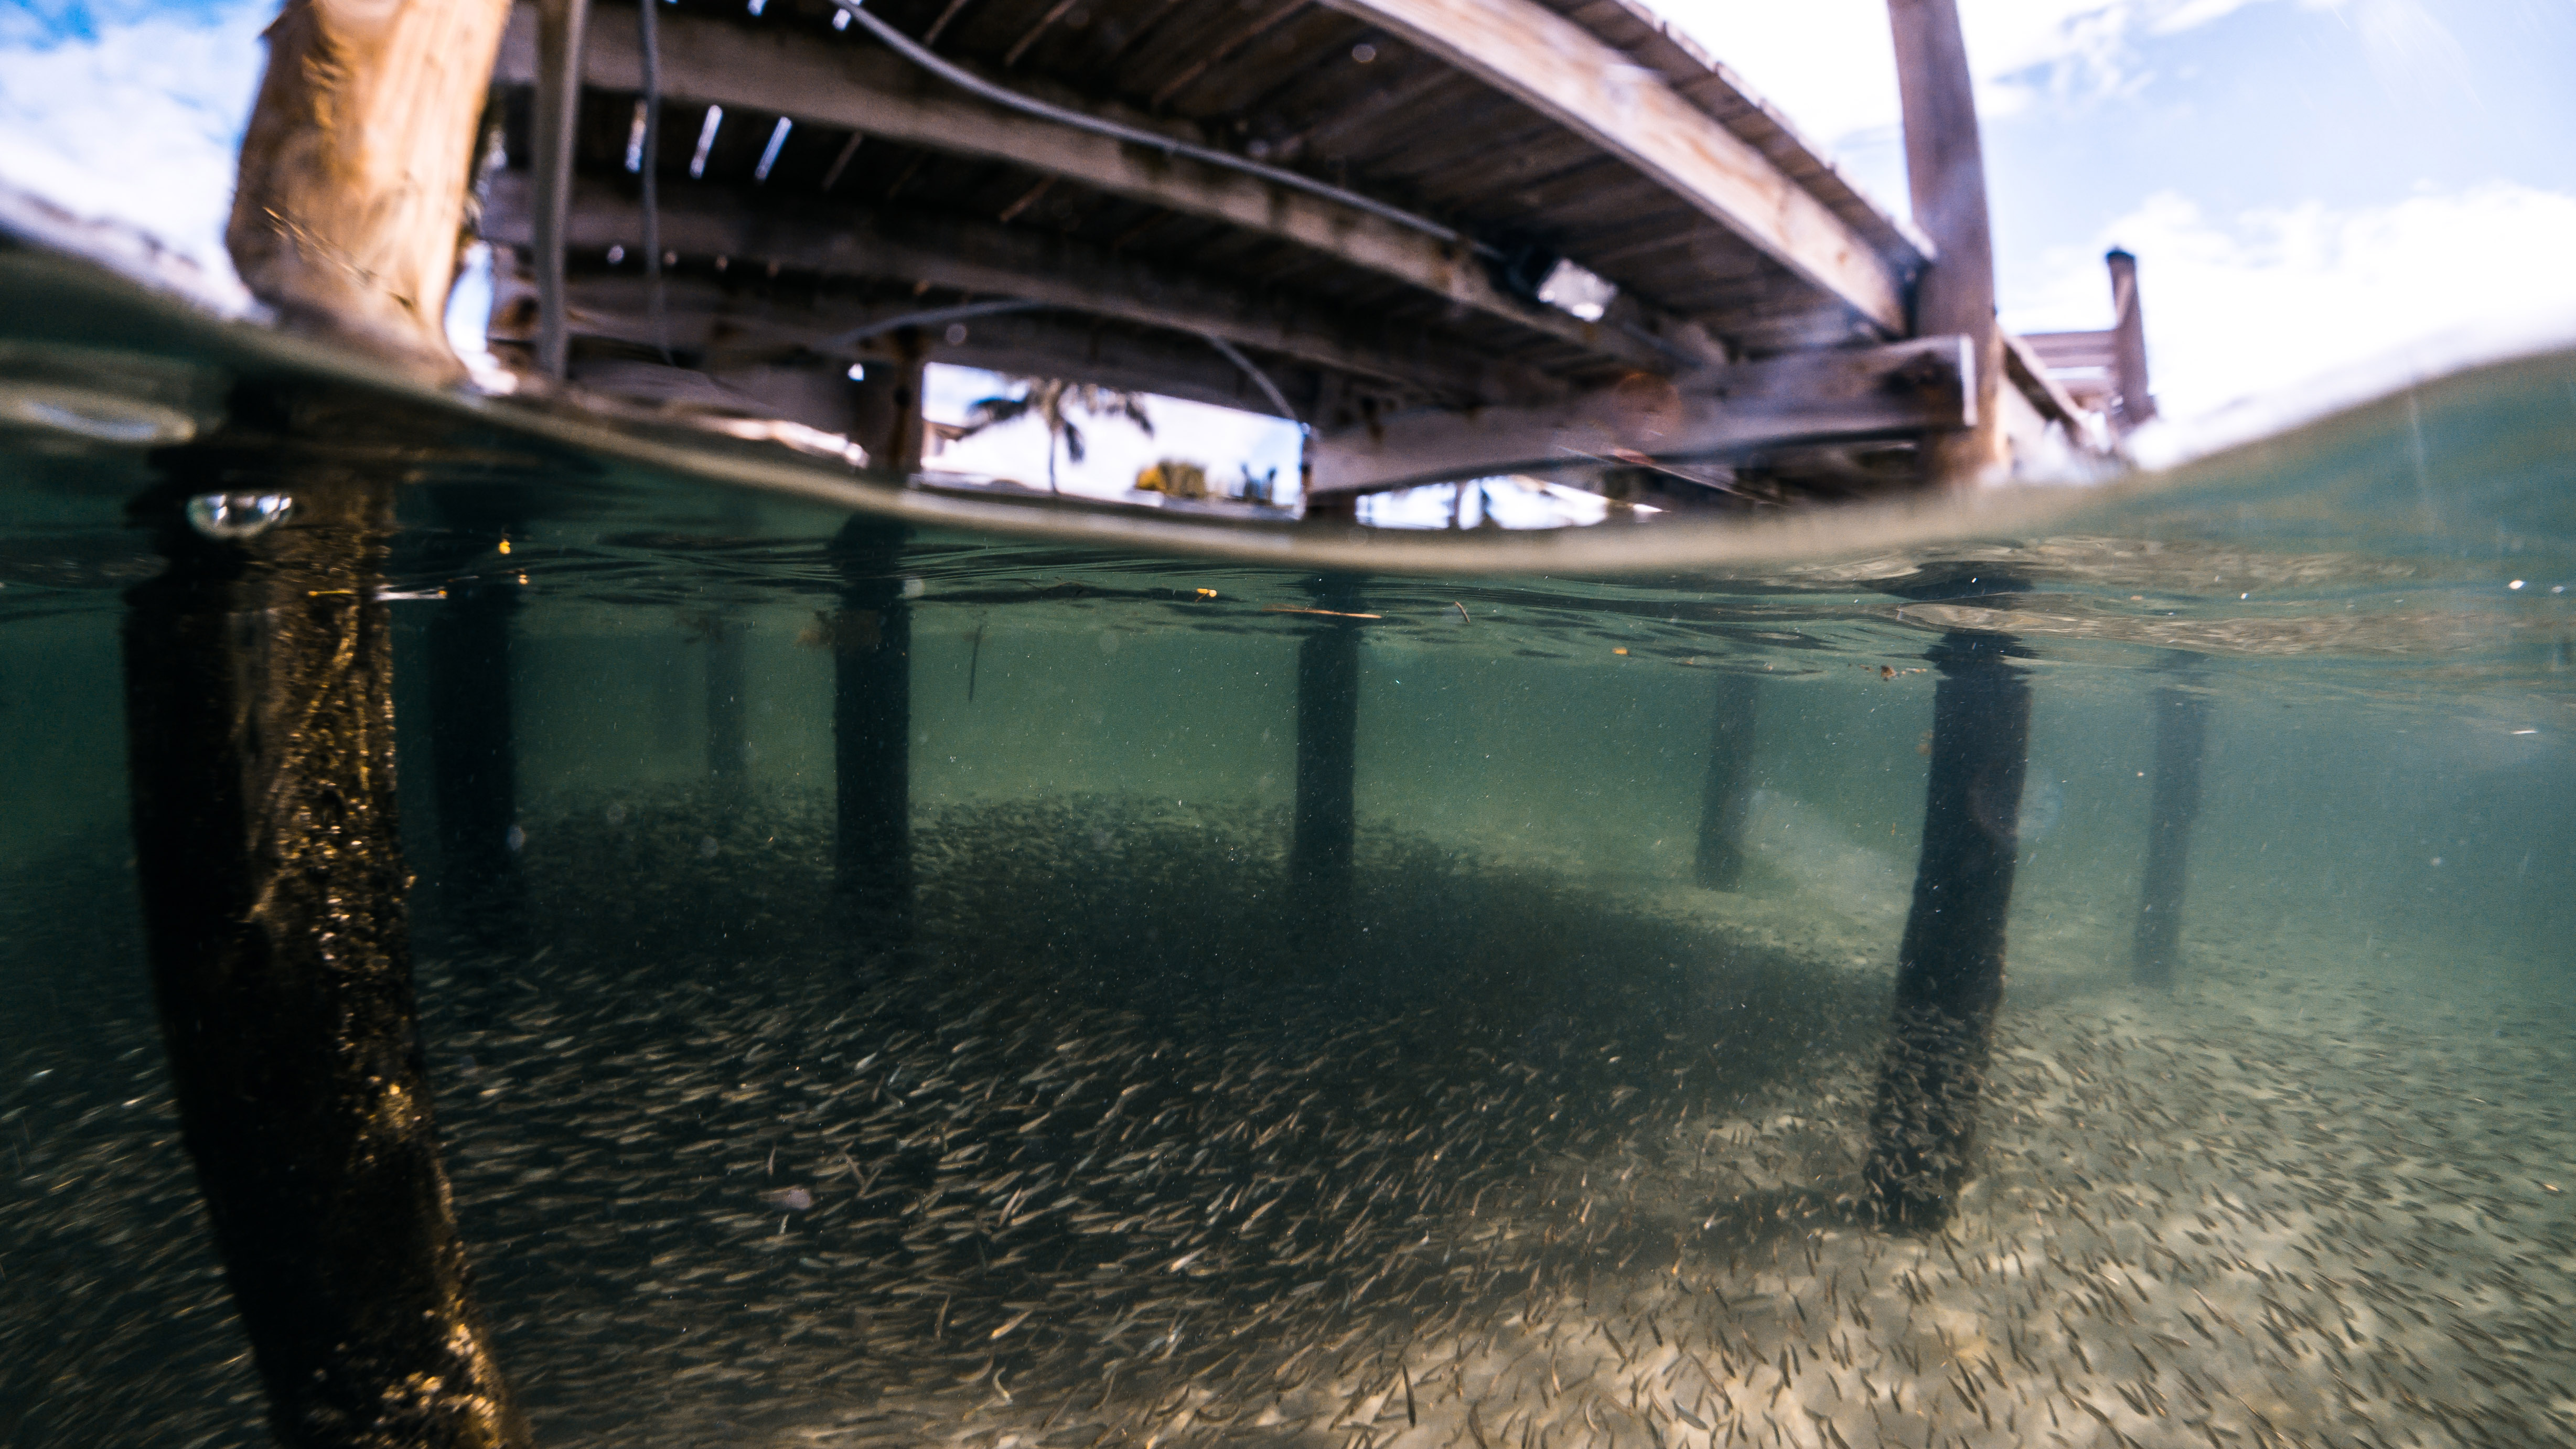 Overhead structure and shade can protect forage fish from birds, but leave them vulnerable to ambush by predators lurking in the shadows. Small schooling fish are also susceptible to pollution from increasing coastal development and other sources as well as changing ocean conditions, such as more acidic and warmer waters.